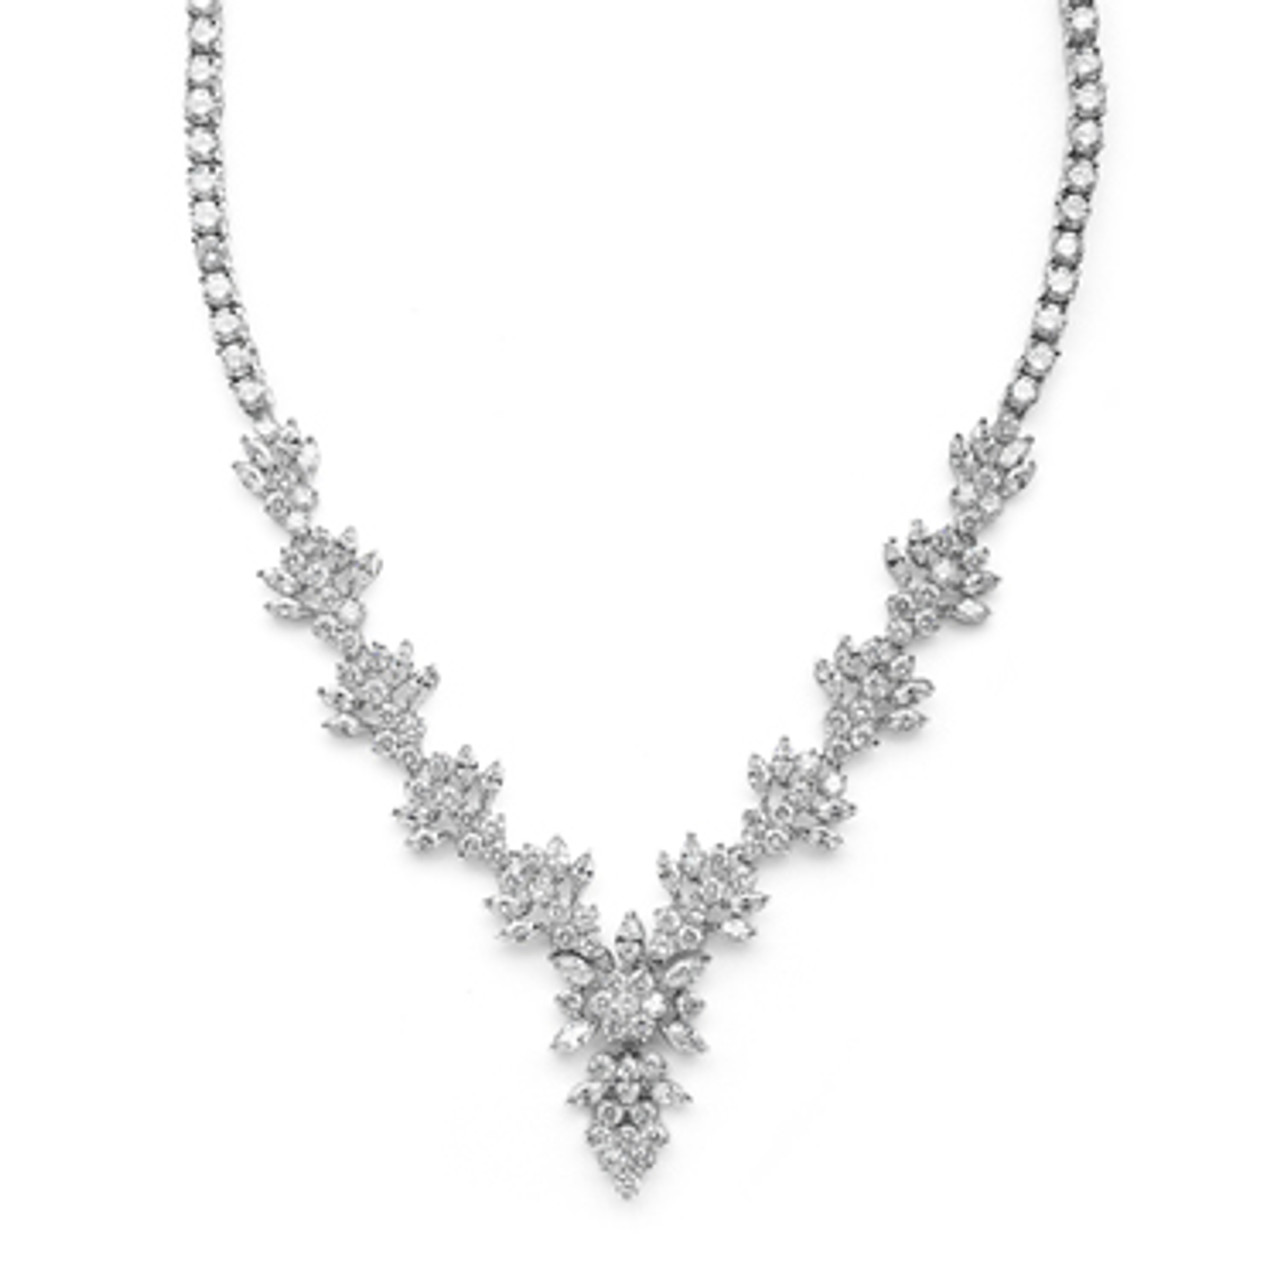 Mariells Top Selling Marquis CZ Cluster Wedding or Pageant Necklace 4239N